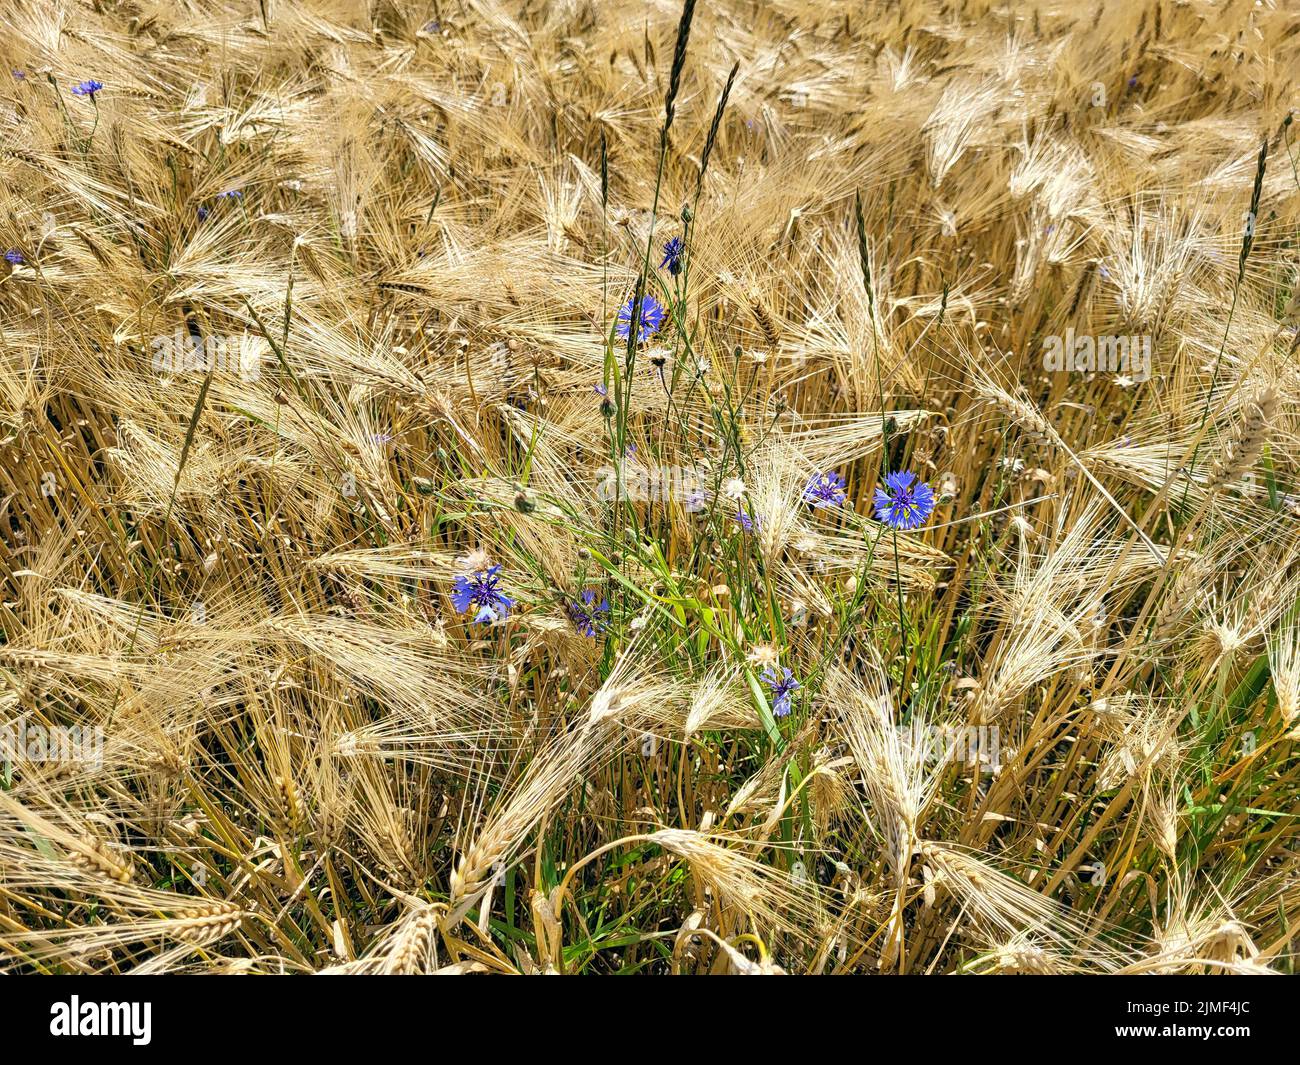 Austria, field with ripe ears of rye ready to be harvested, with some cornflowers in between in agricultural landscape of Reisenberg, Lower Austria Stock Photo